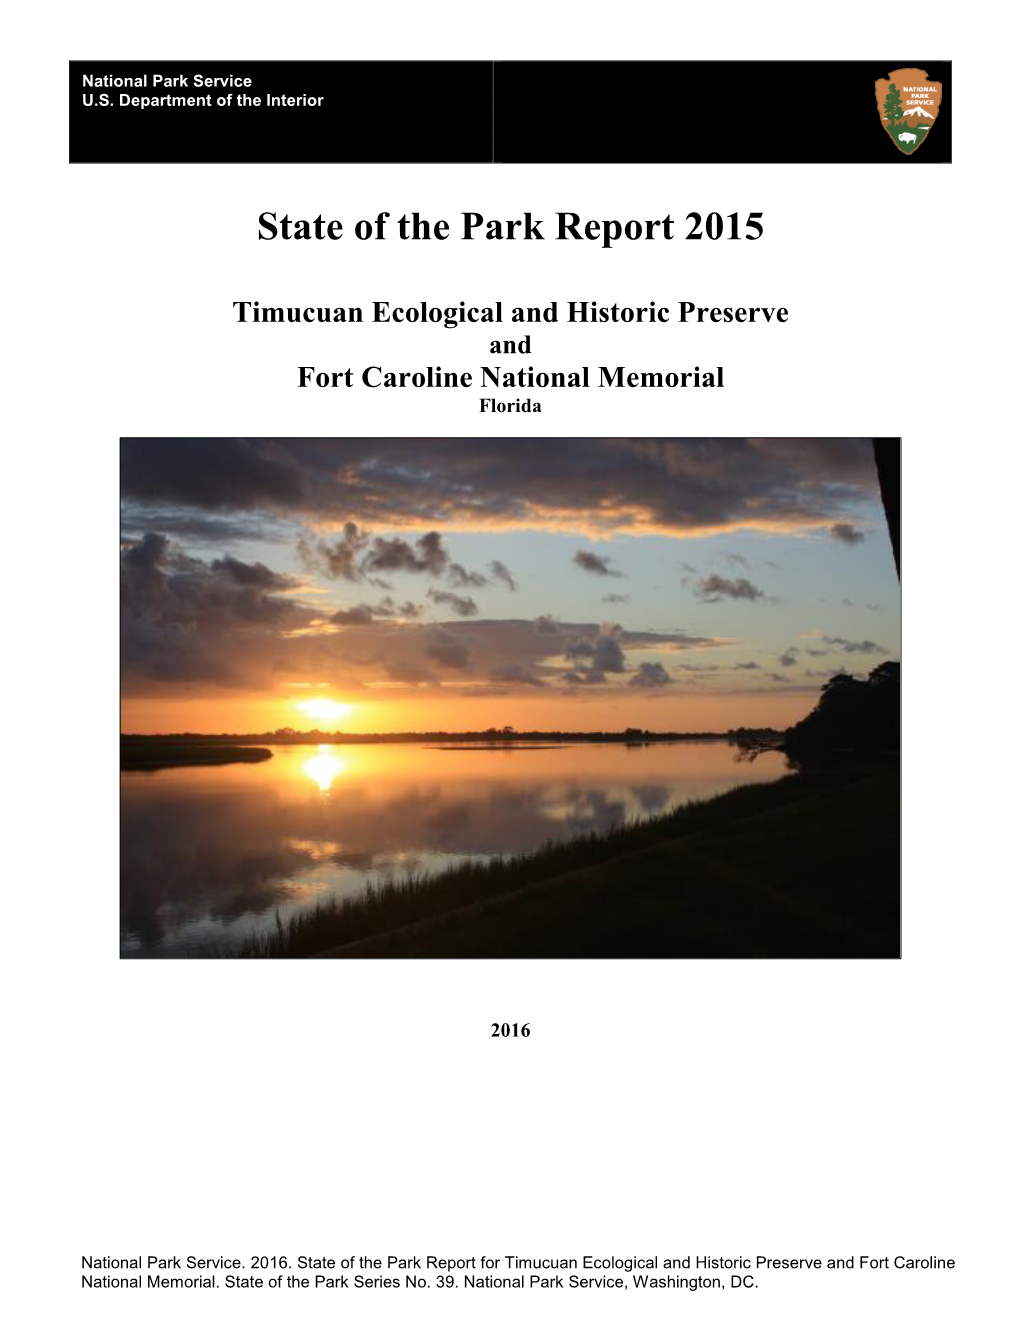 State of the Park Report, Timucuan Ecological and Historic Preserve